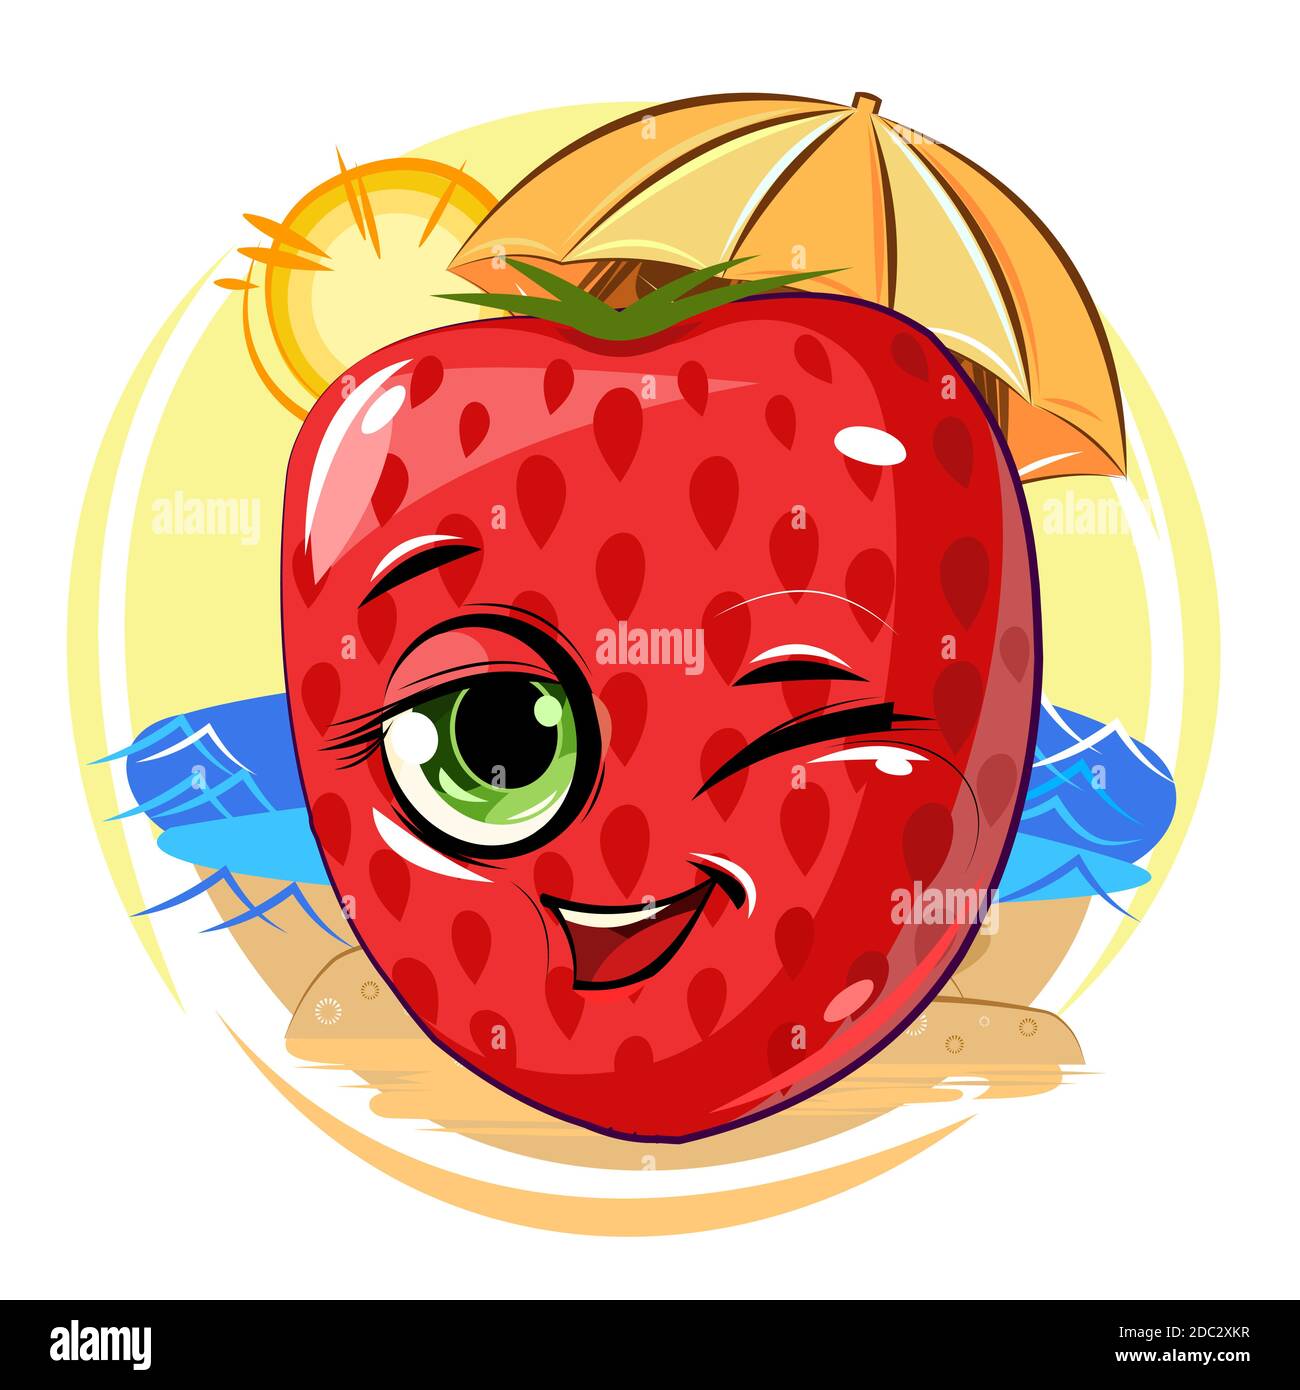 Strawberry cheerful smile. Winks. Relaxing on the beach in the sun. In the shade of an umbrella. Juicy red berry with a face. Cartoon style. Isolated on white background. Vector illustration. Stock Vector